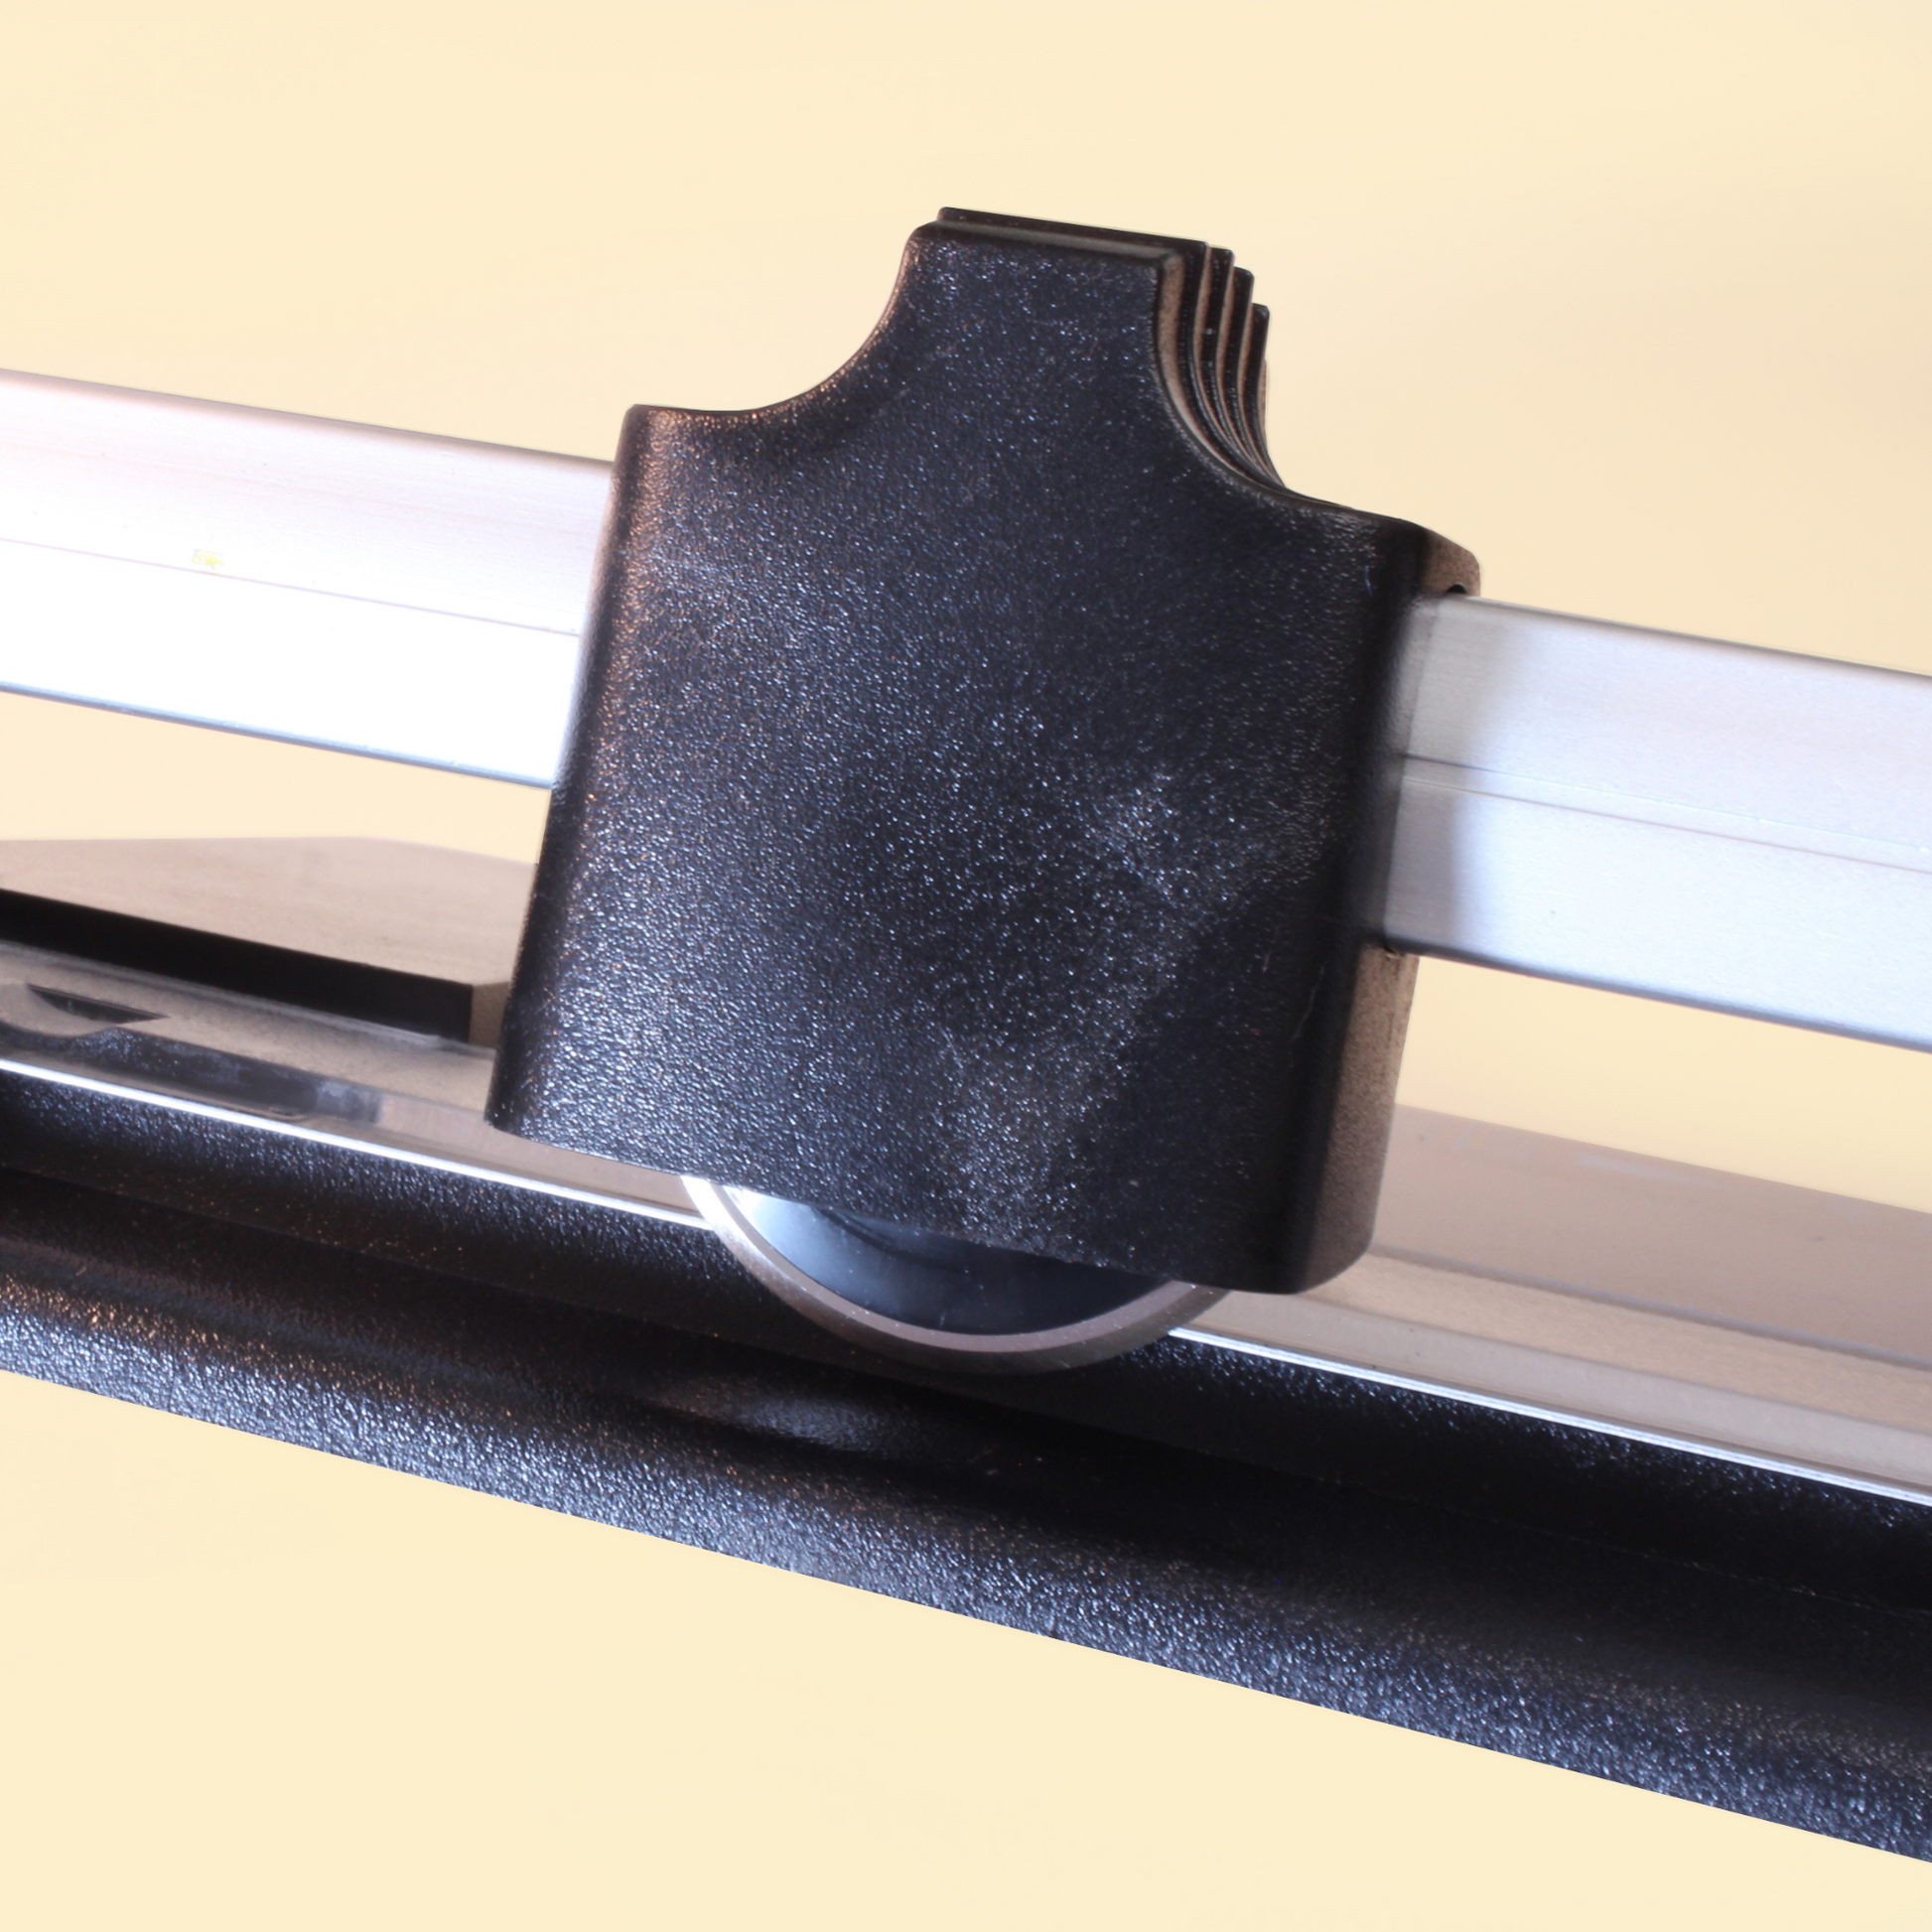 A replacement cutting head mounted on a silver guide rail of a Cathedral Products paper trimmer, against a beige background. The head's ground rotary blade is designed for smooth sliding and precision cutting.